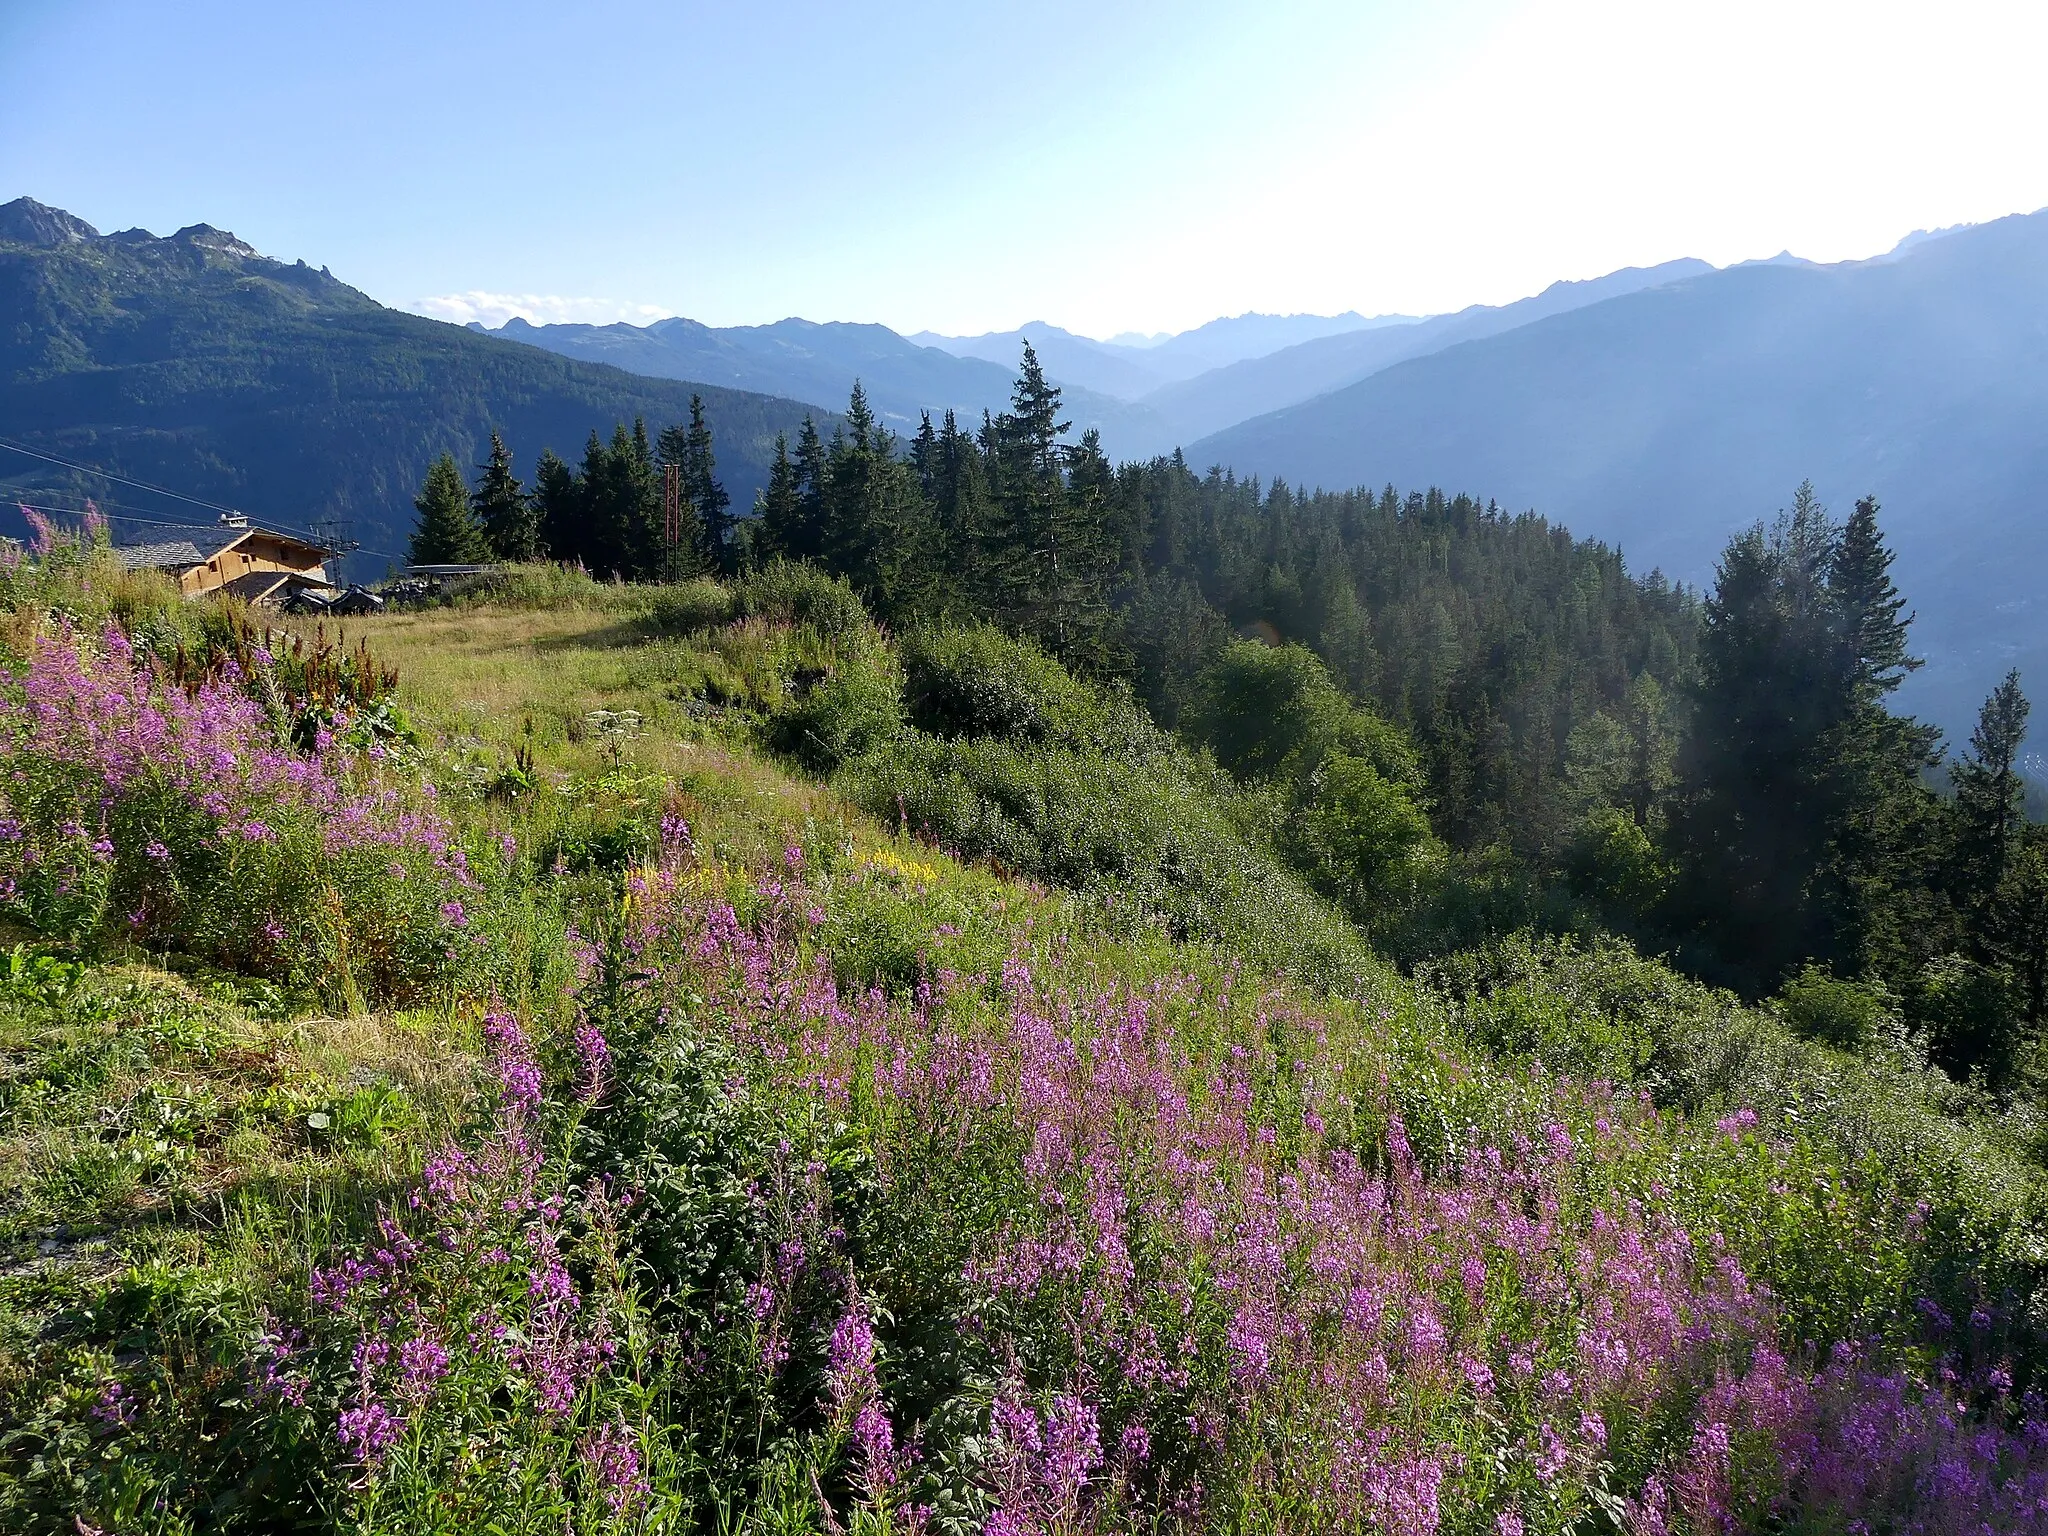 Photo showing: Sight, in a summer evening, of the flowered slopes of La Rosière resort, on the heights of the Tarentaise valley visible at the background, in Savoie, France.